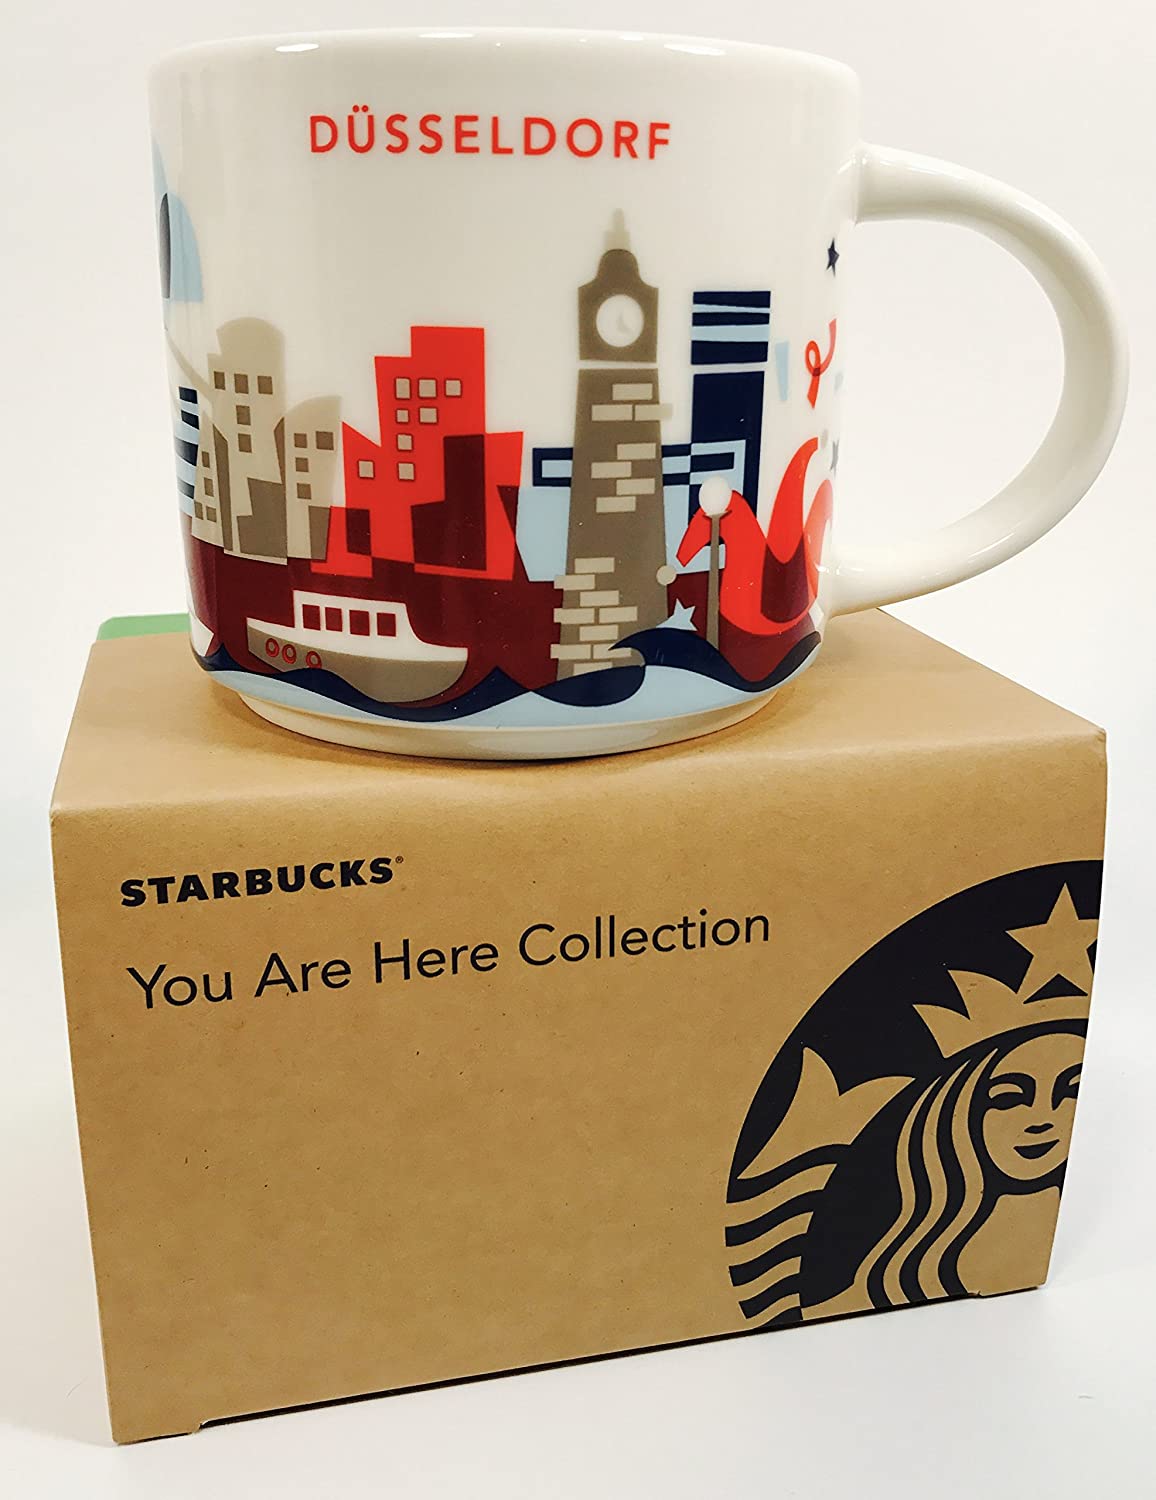 Starbucks Your Are Here Collection (YAH) Düsseldorf Germany Coffee Cup (White, Red)